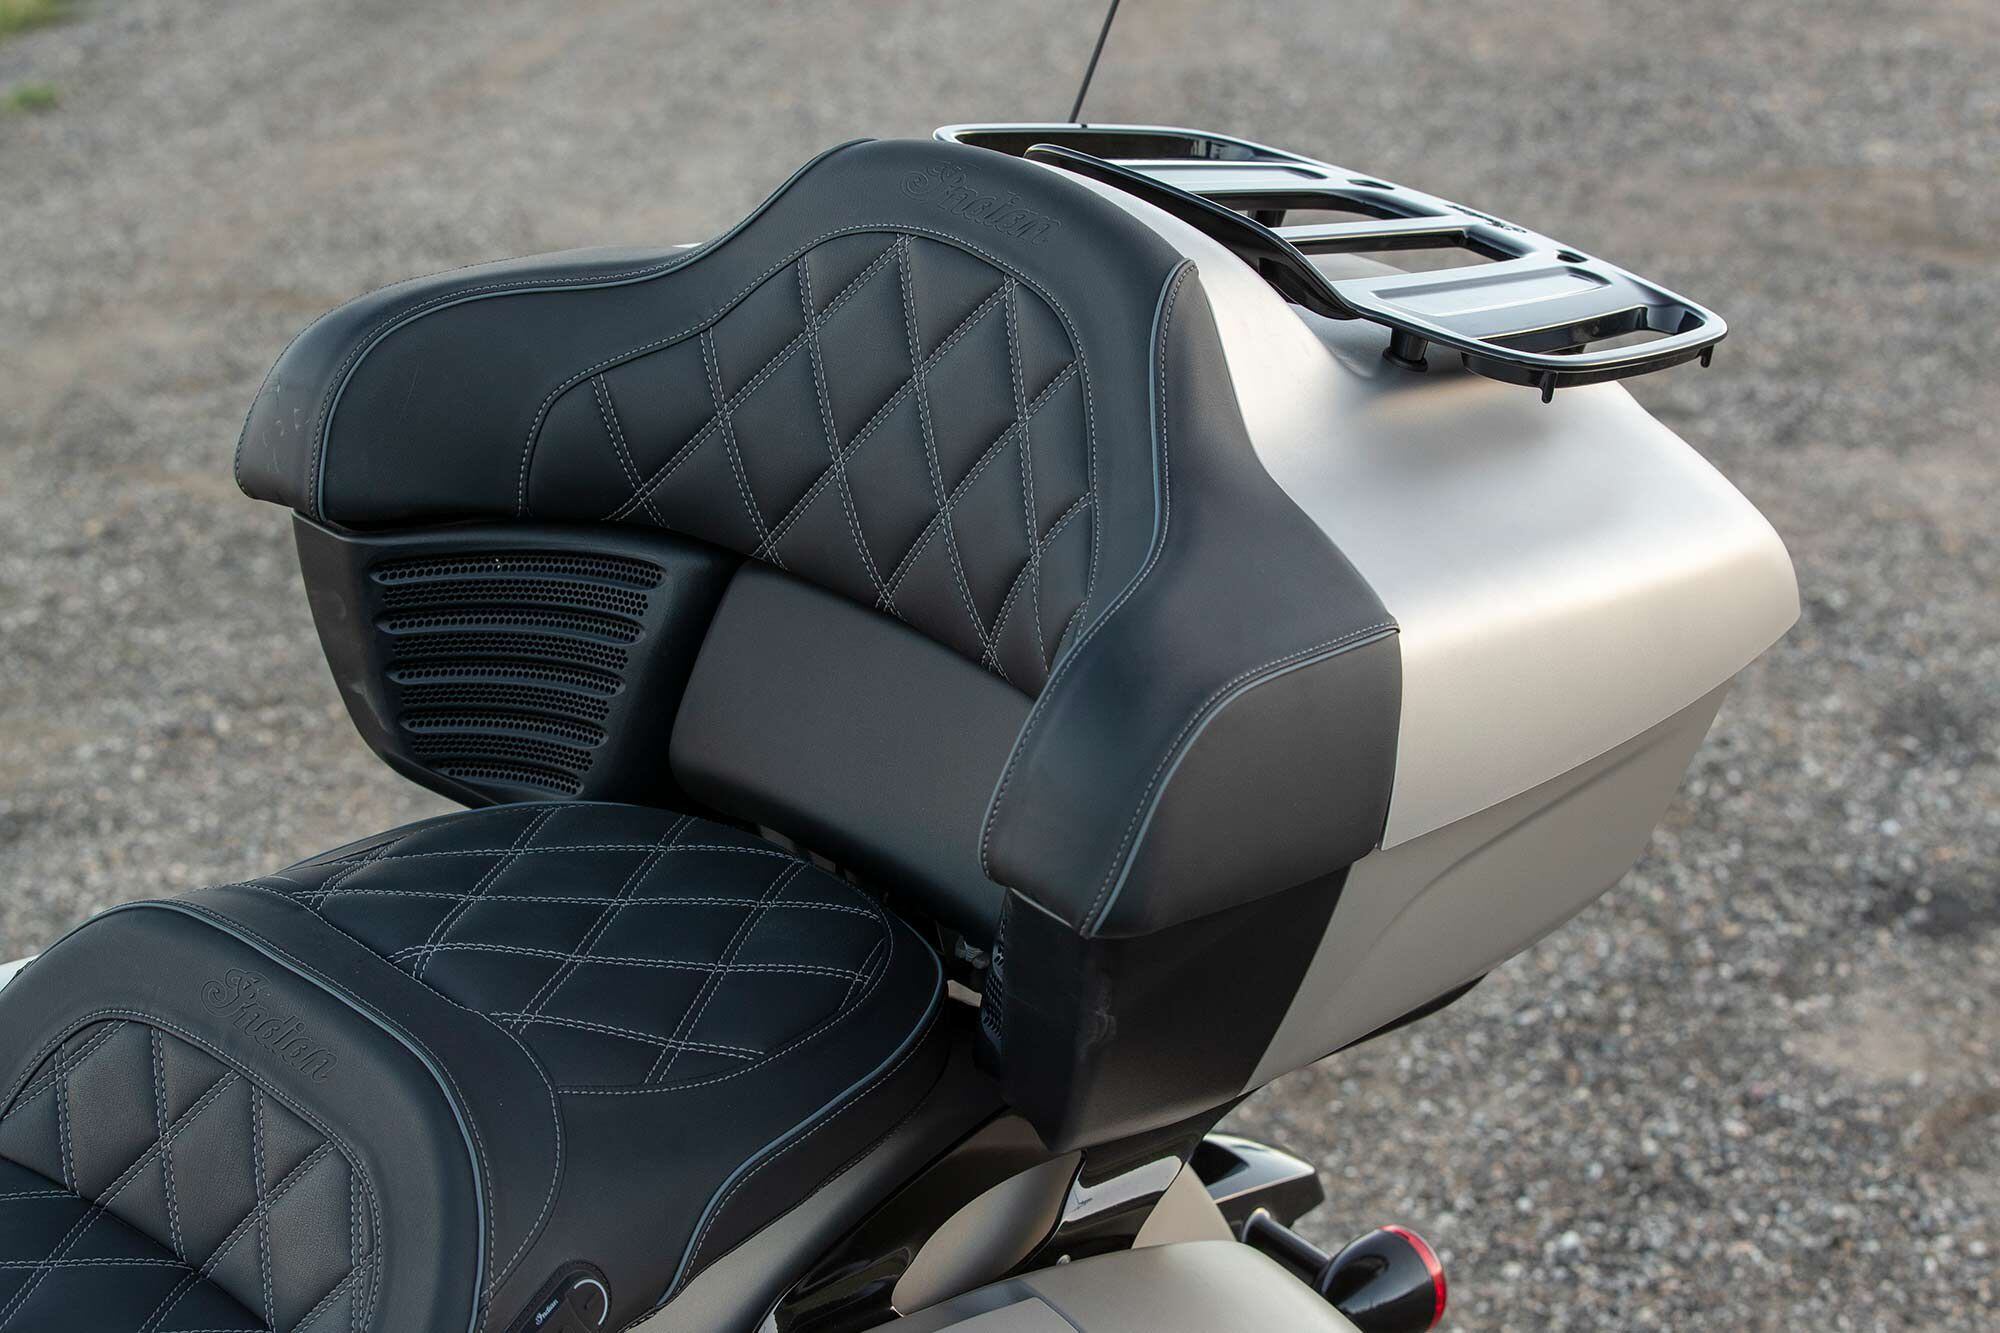 The Pursuit shares a top trunk with Indian’s Roadmaster models.